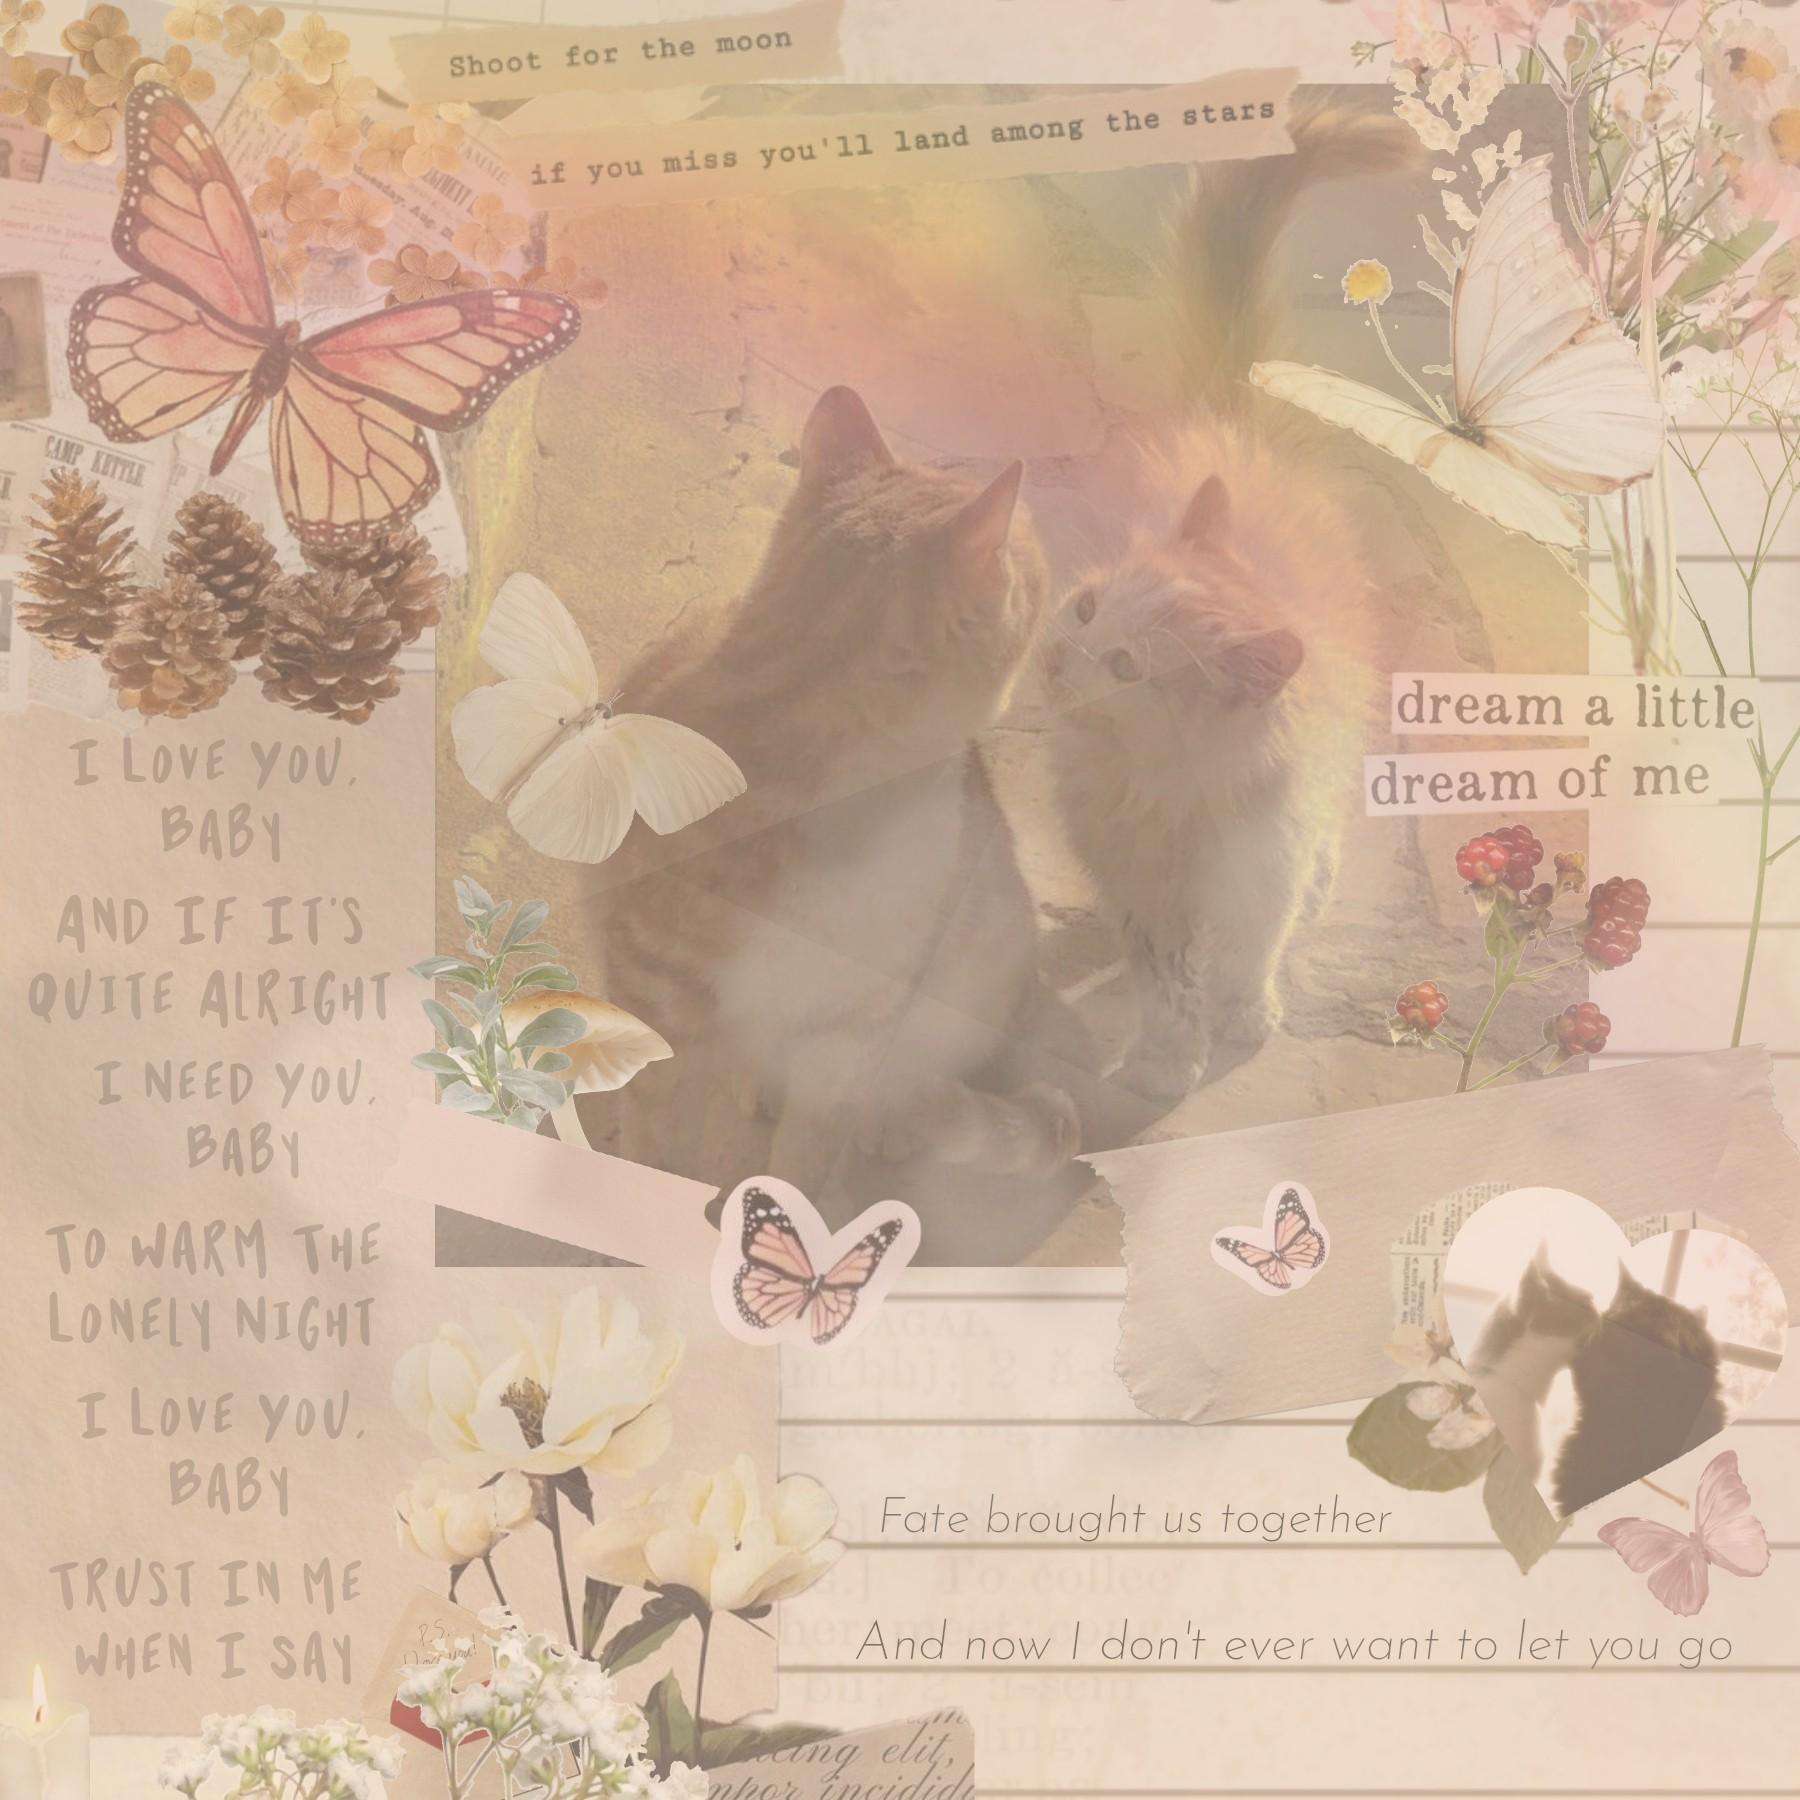 🌸🐈🤎

Aesthetic Cottagecore Vintage Cats

I tried something new! I really like it, I'll probably do more like this in the future!